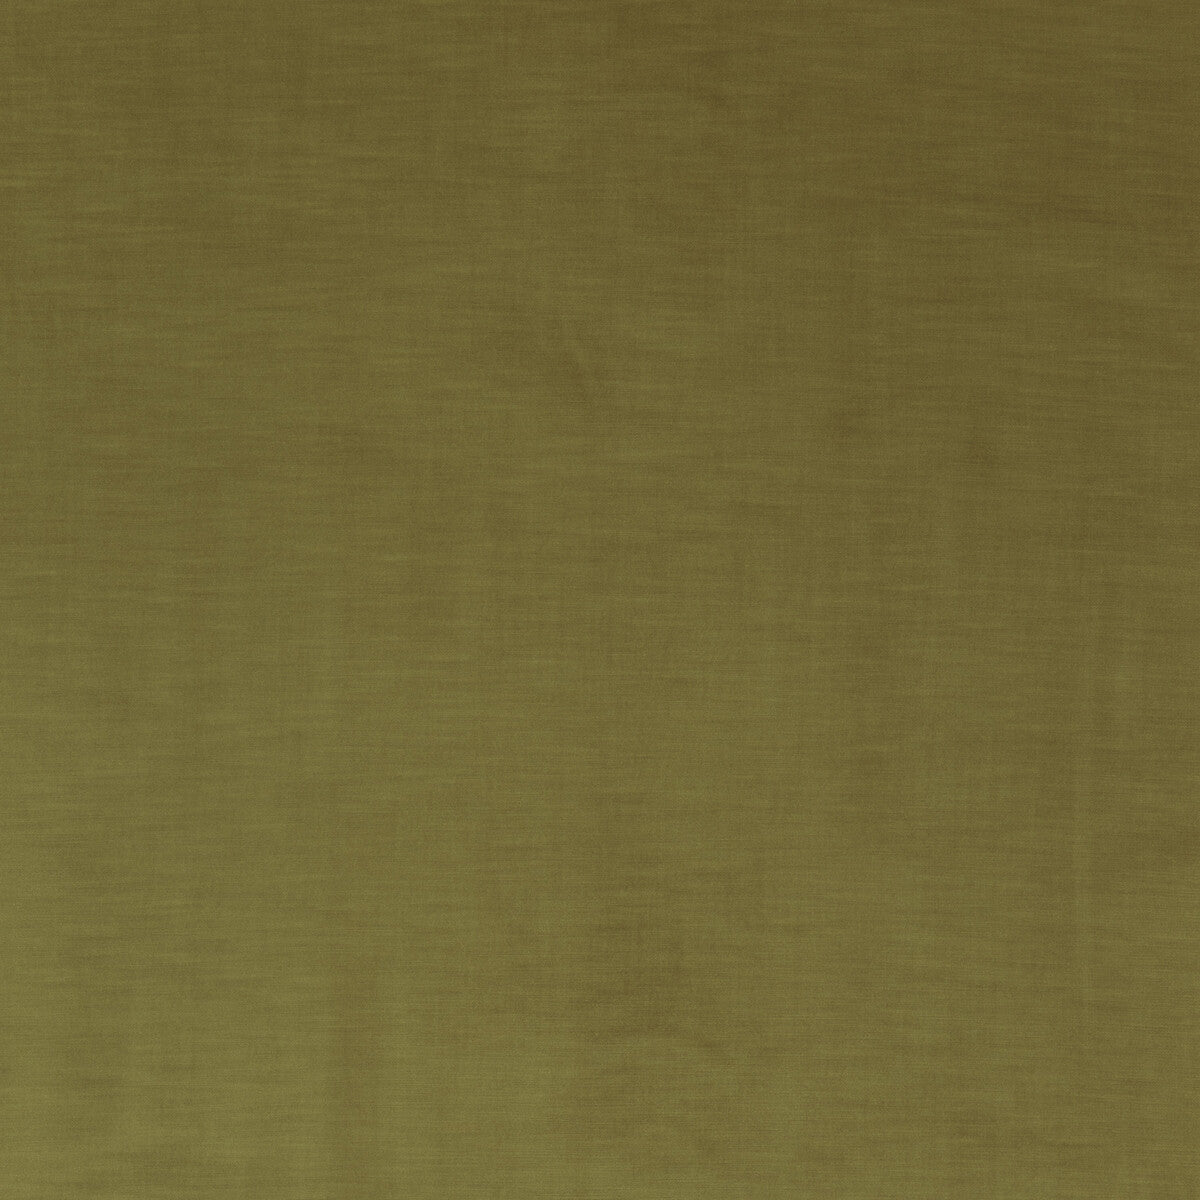 Coniston Velvet fabric in ochre color - pattern BF10781.840.0 - by G P &amp; J Baker in the Coniston Velvet collection